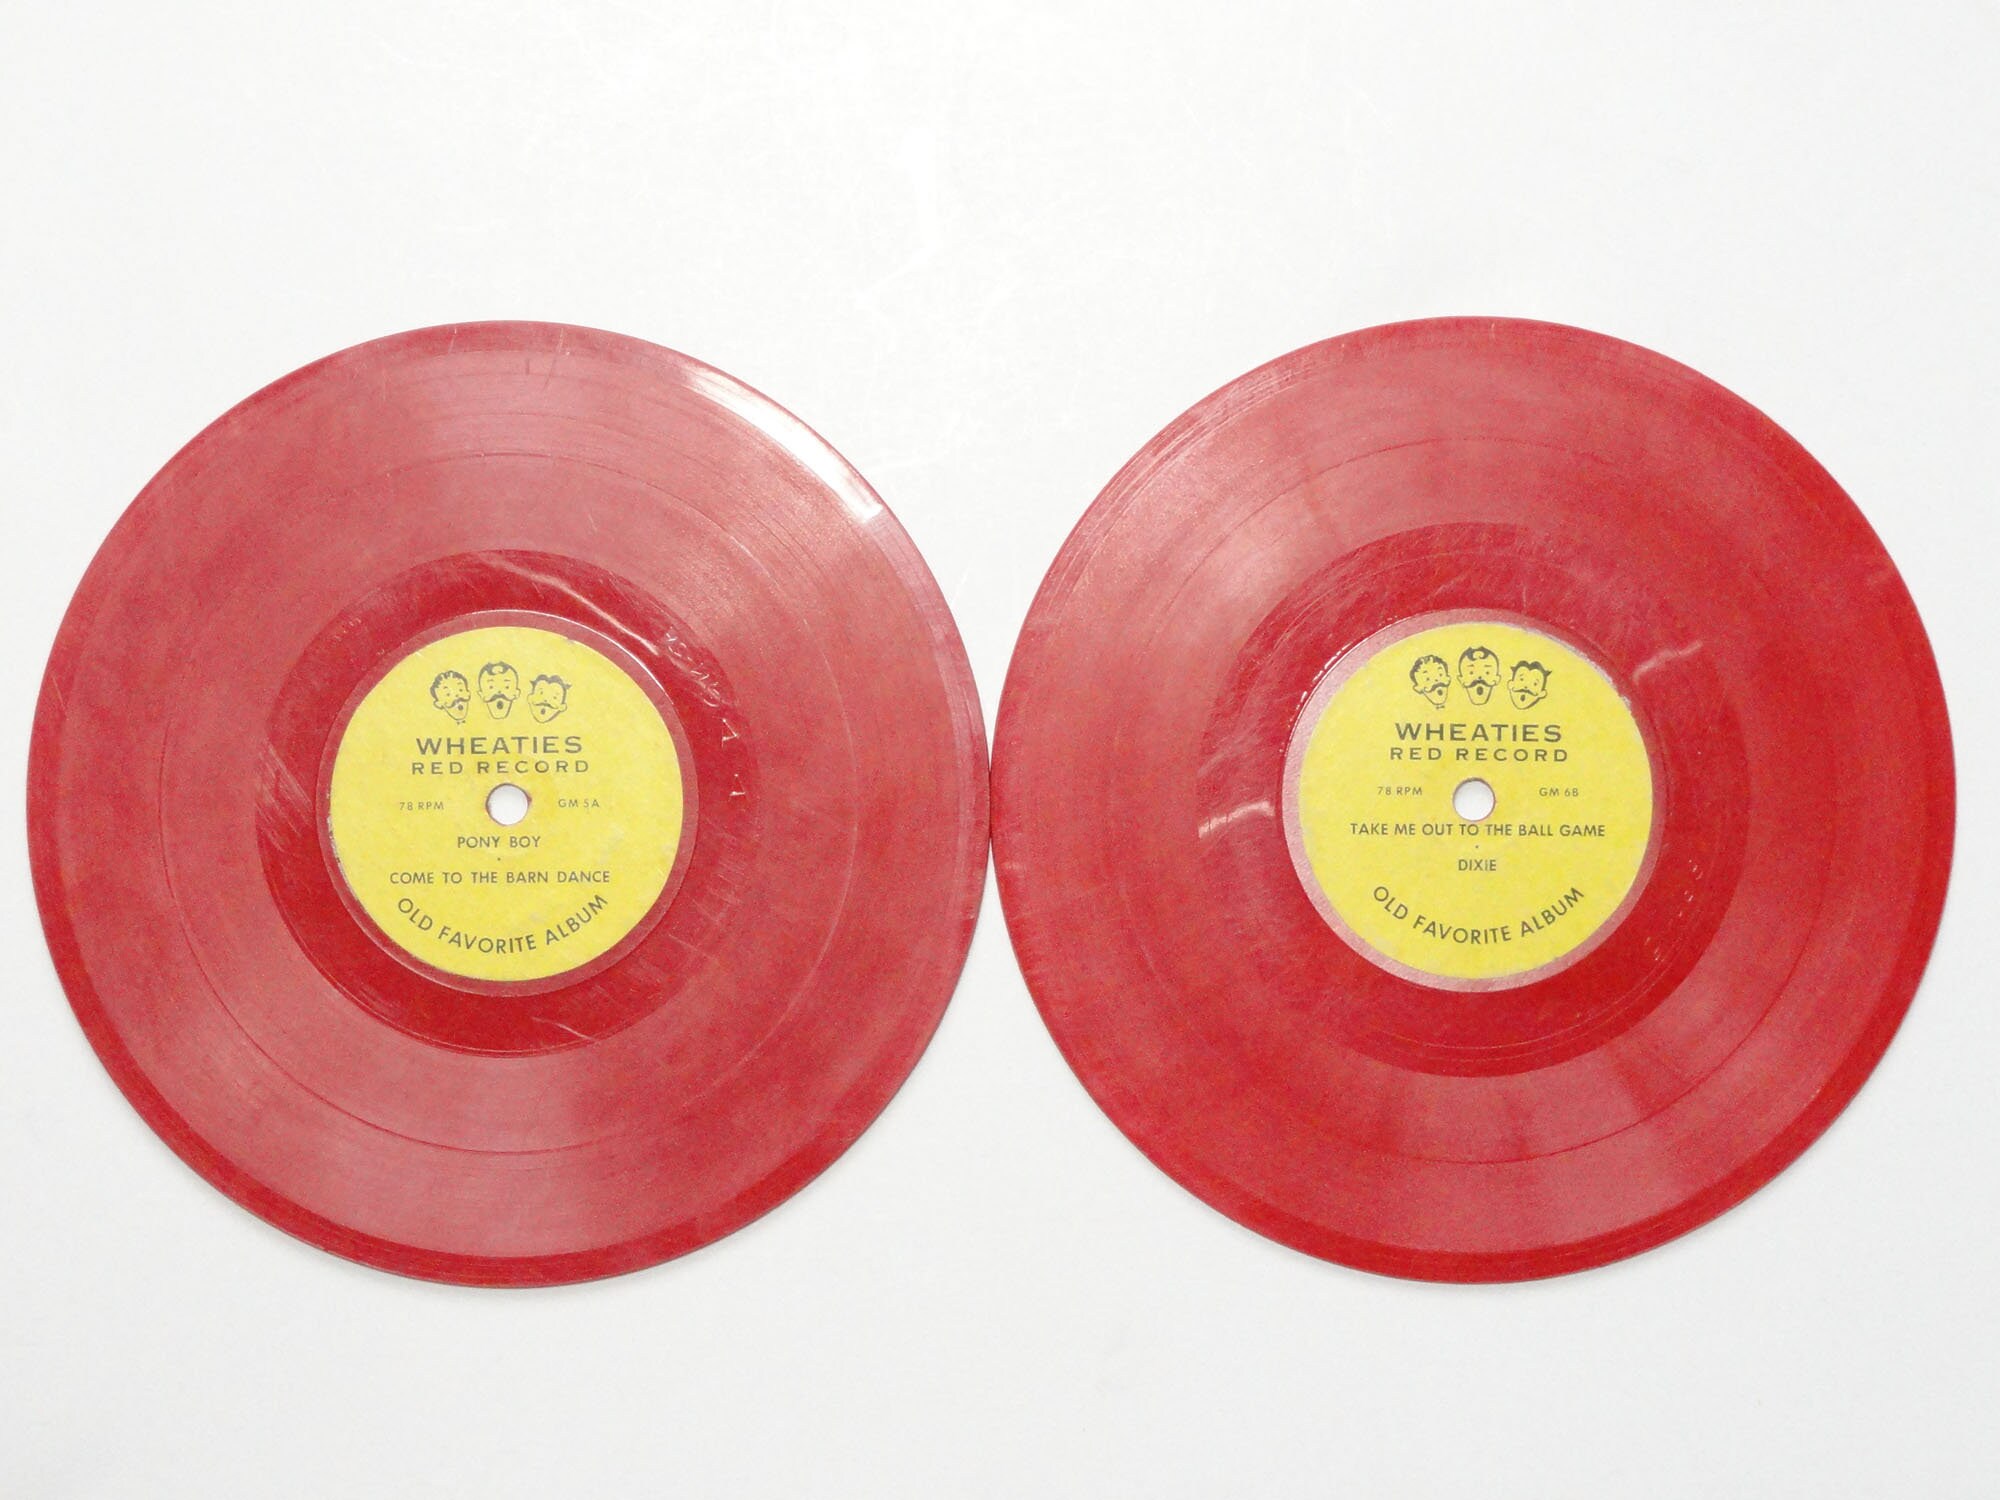 Vintage Red Vinyl 78 RPM Record - Mind-Power Records # MP-7 - Weight  Reduction 